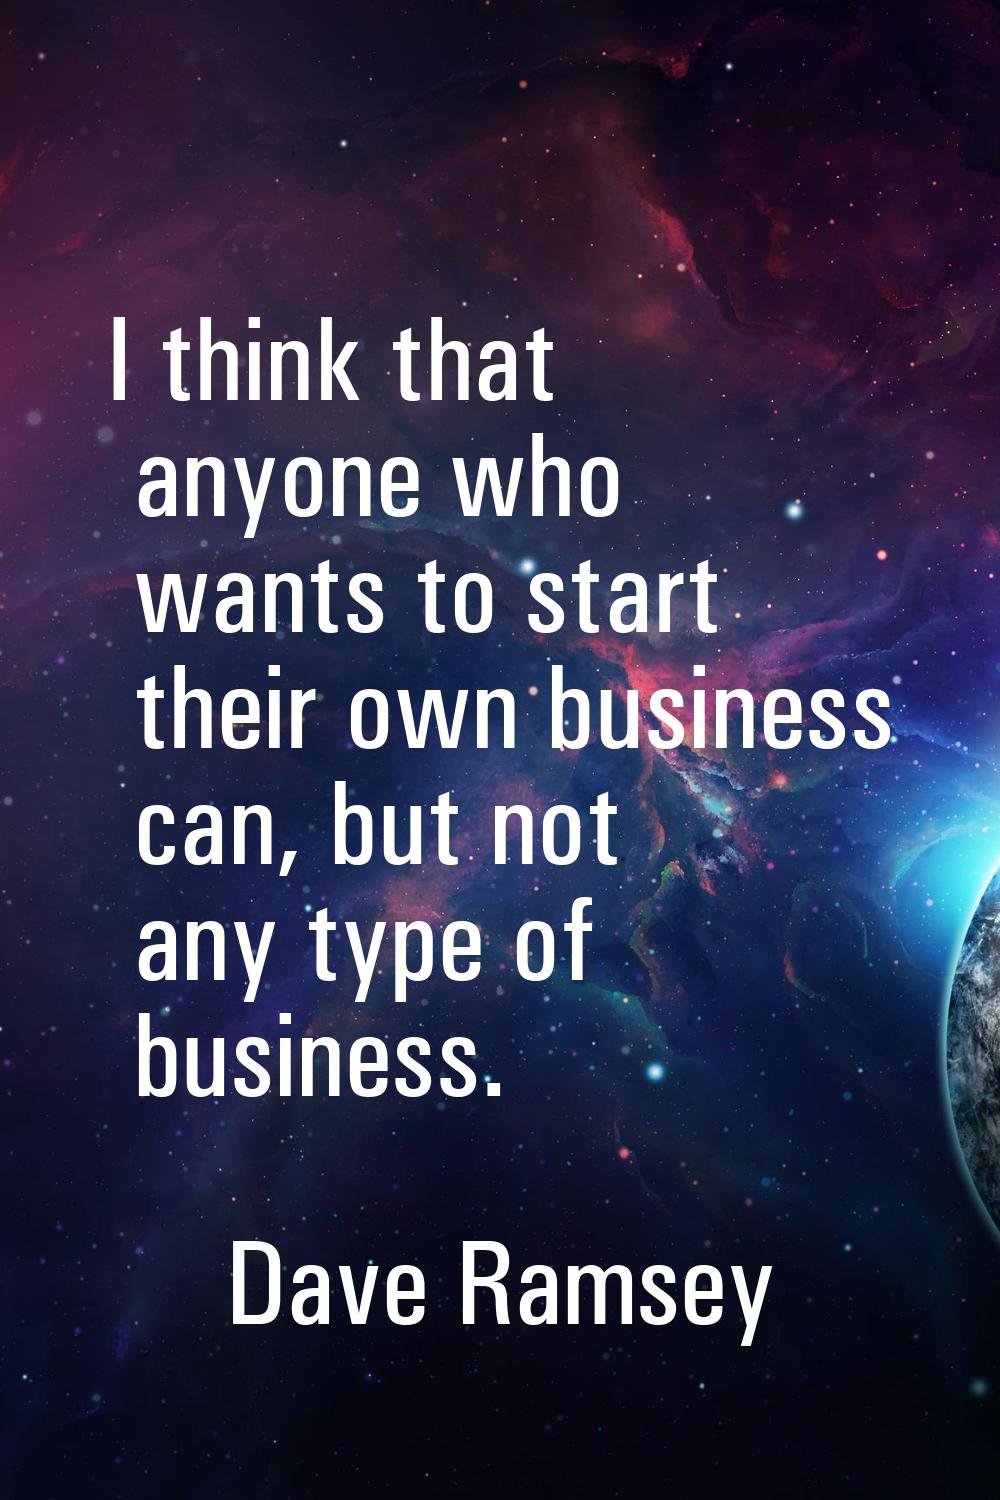 I think that anyone who wants to start their own business can, but not any type of business.